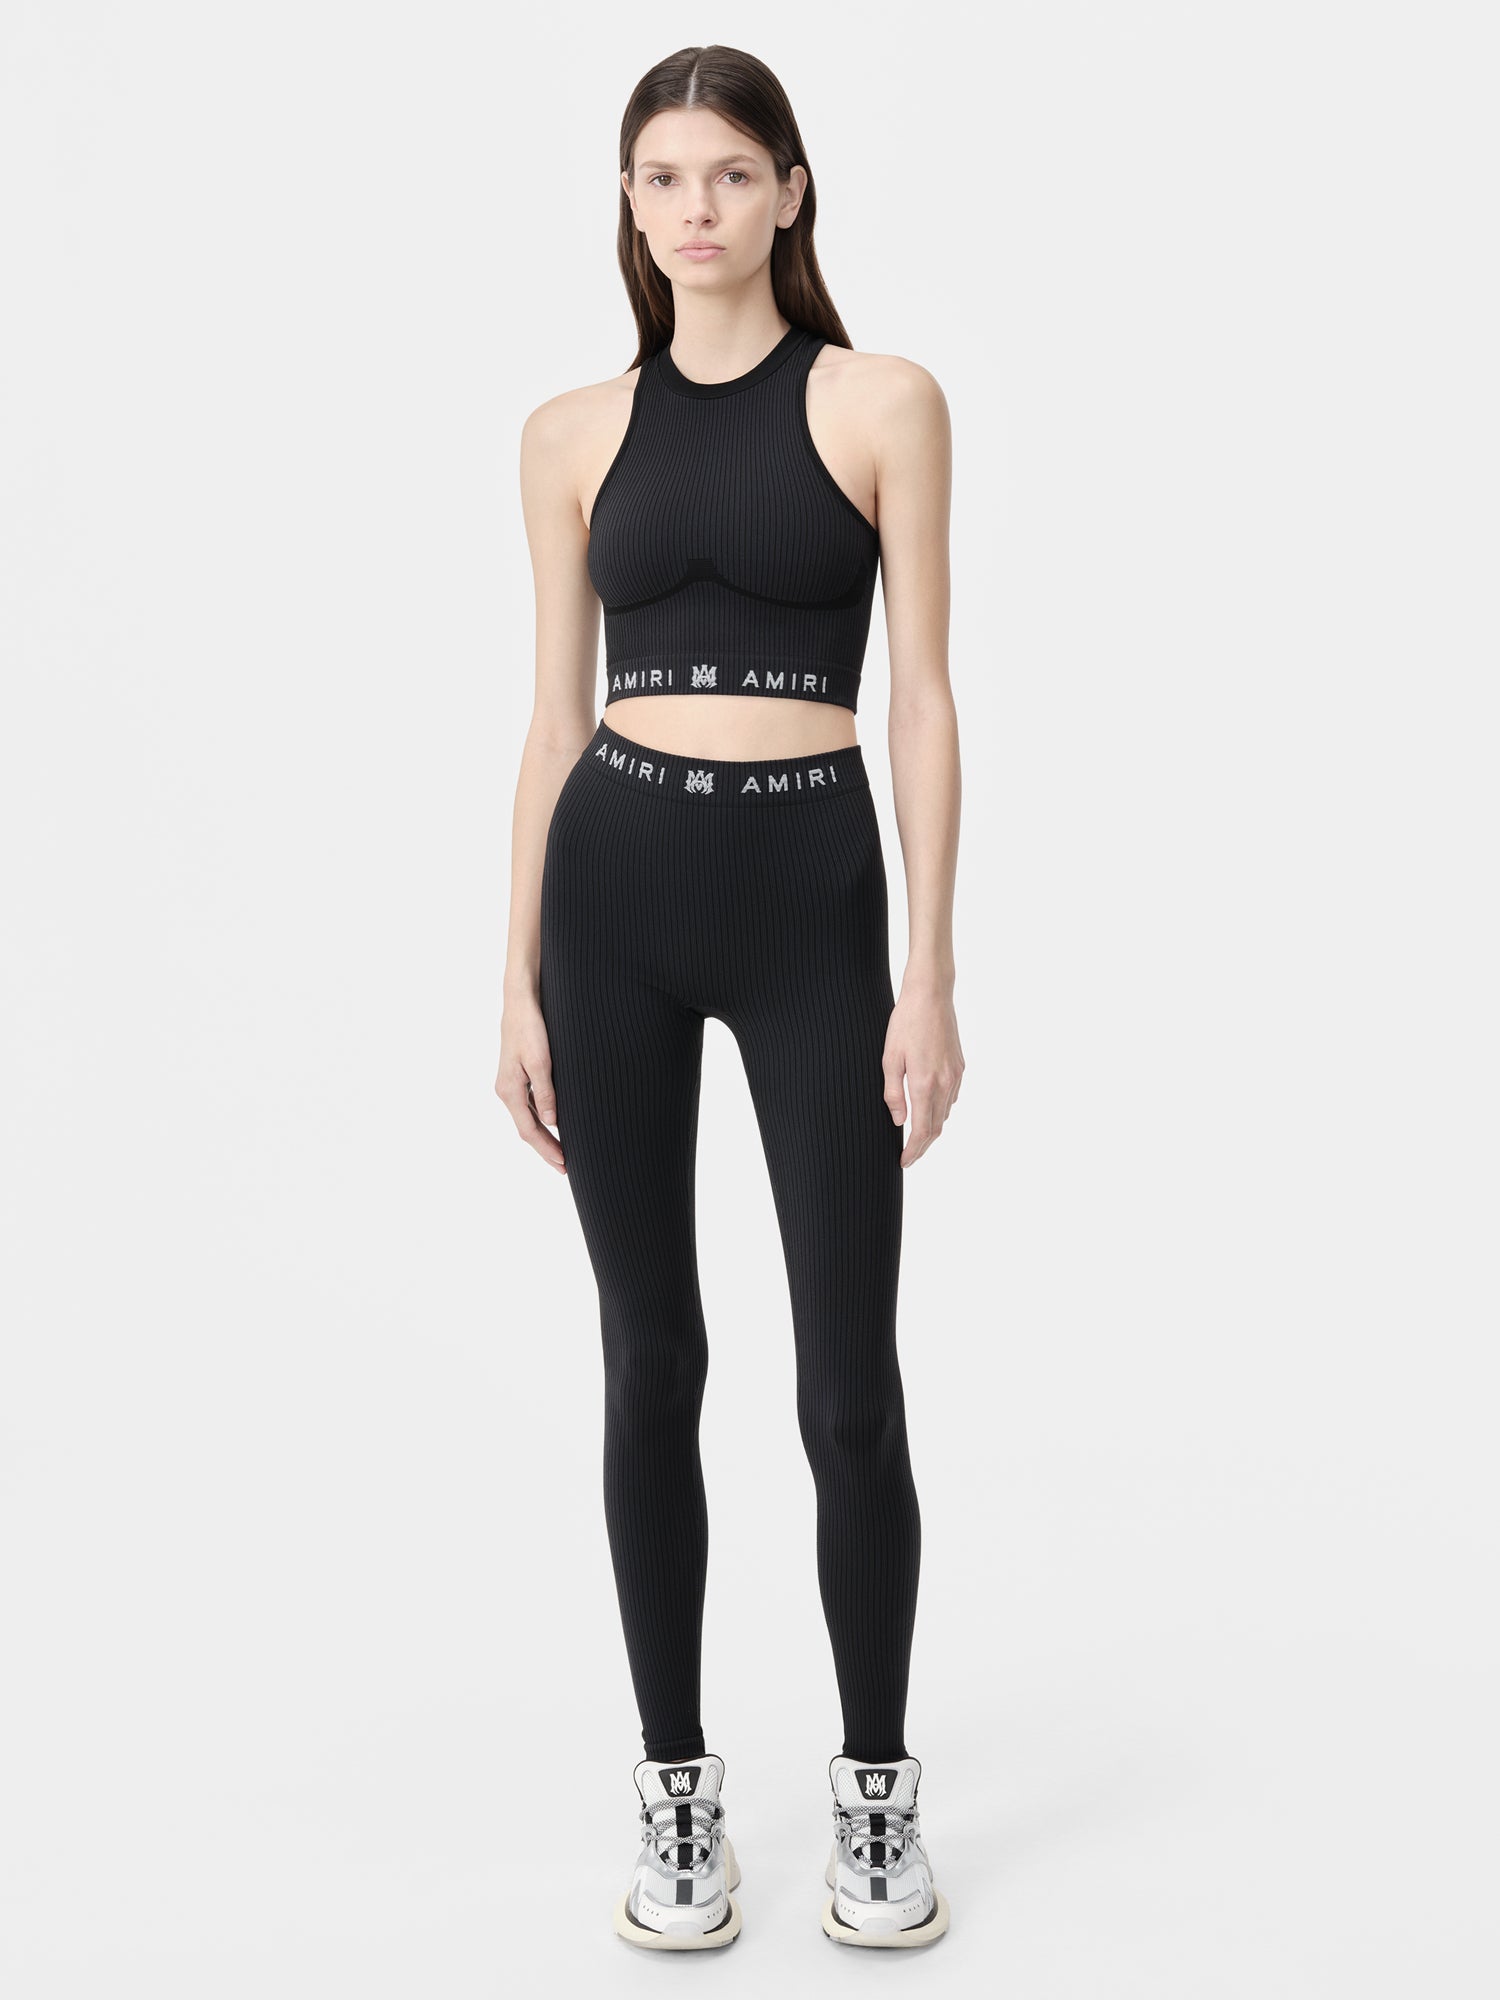 Product WOMEN - MA RIBBED SEAMLESS TANK TOP - Black featured image